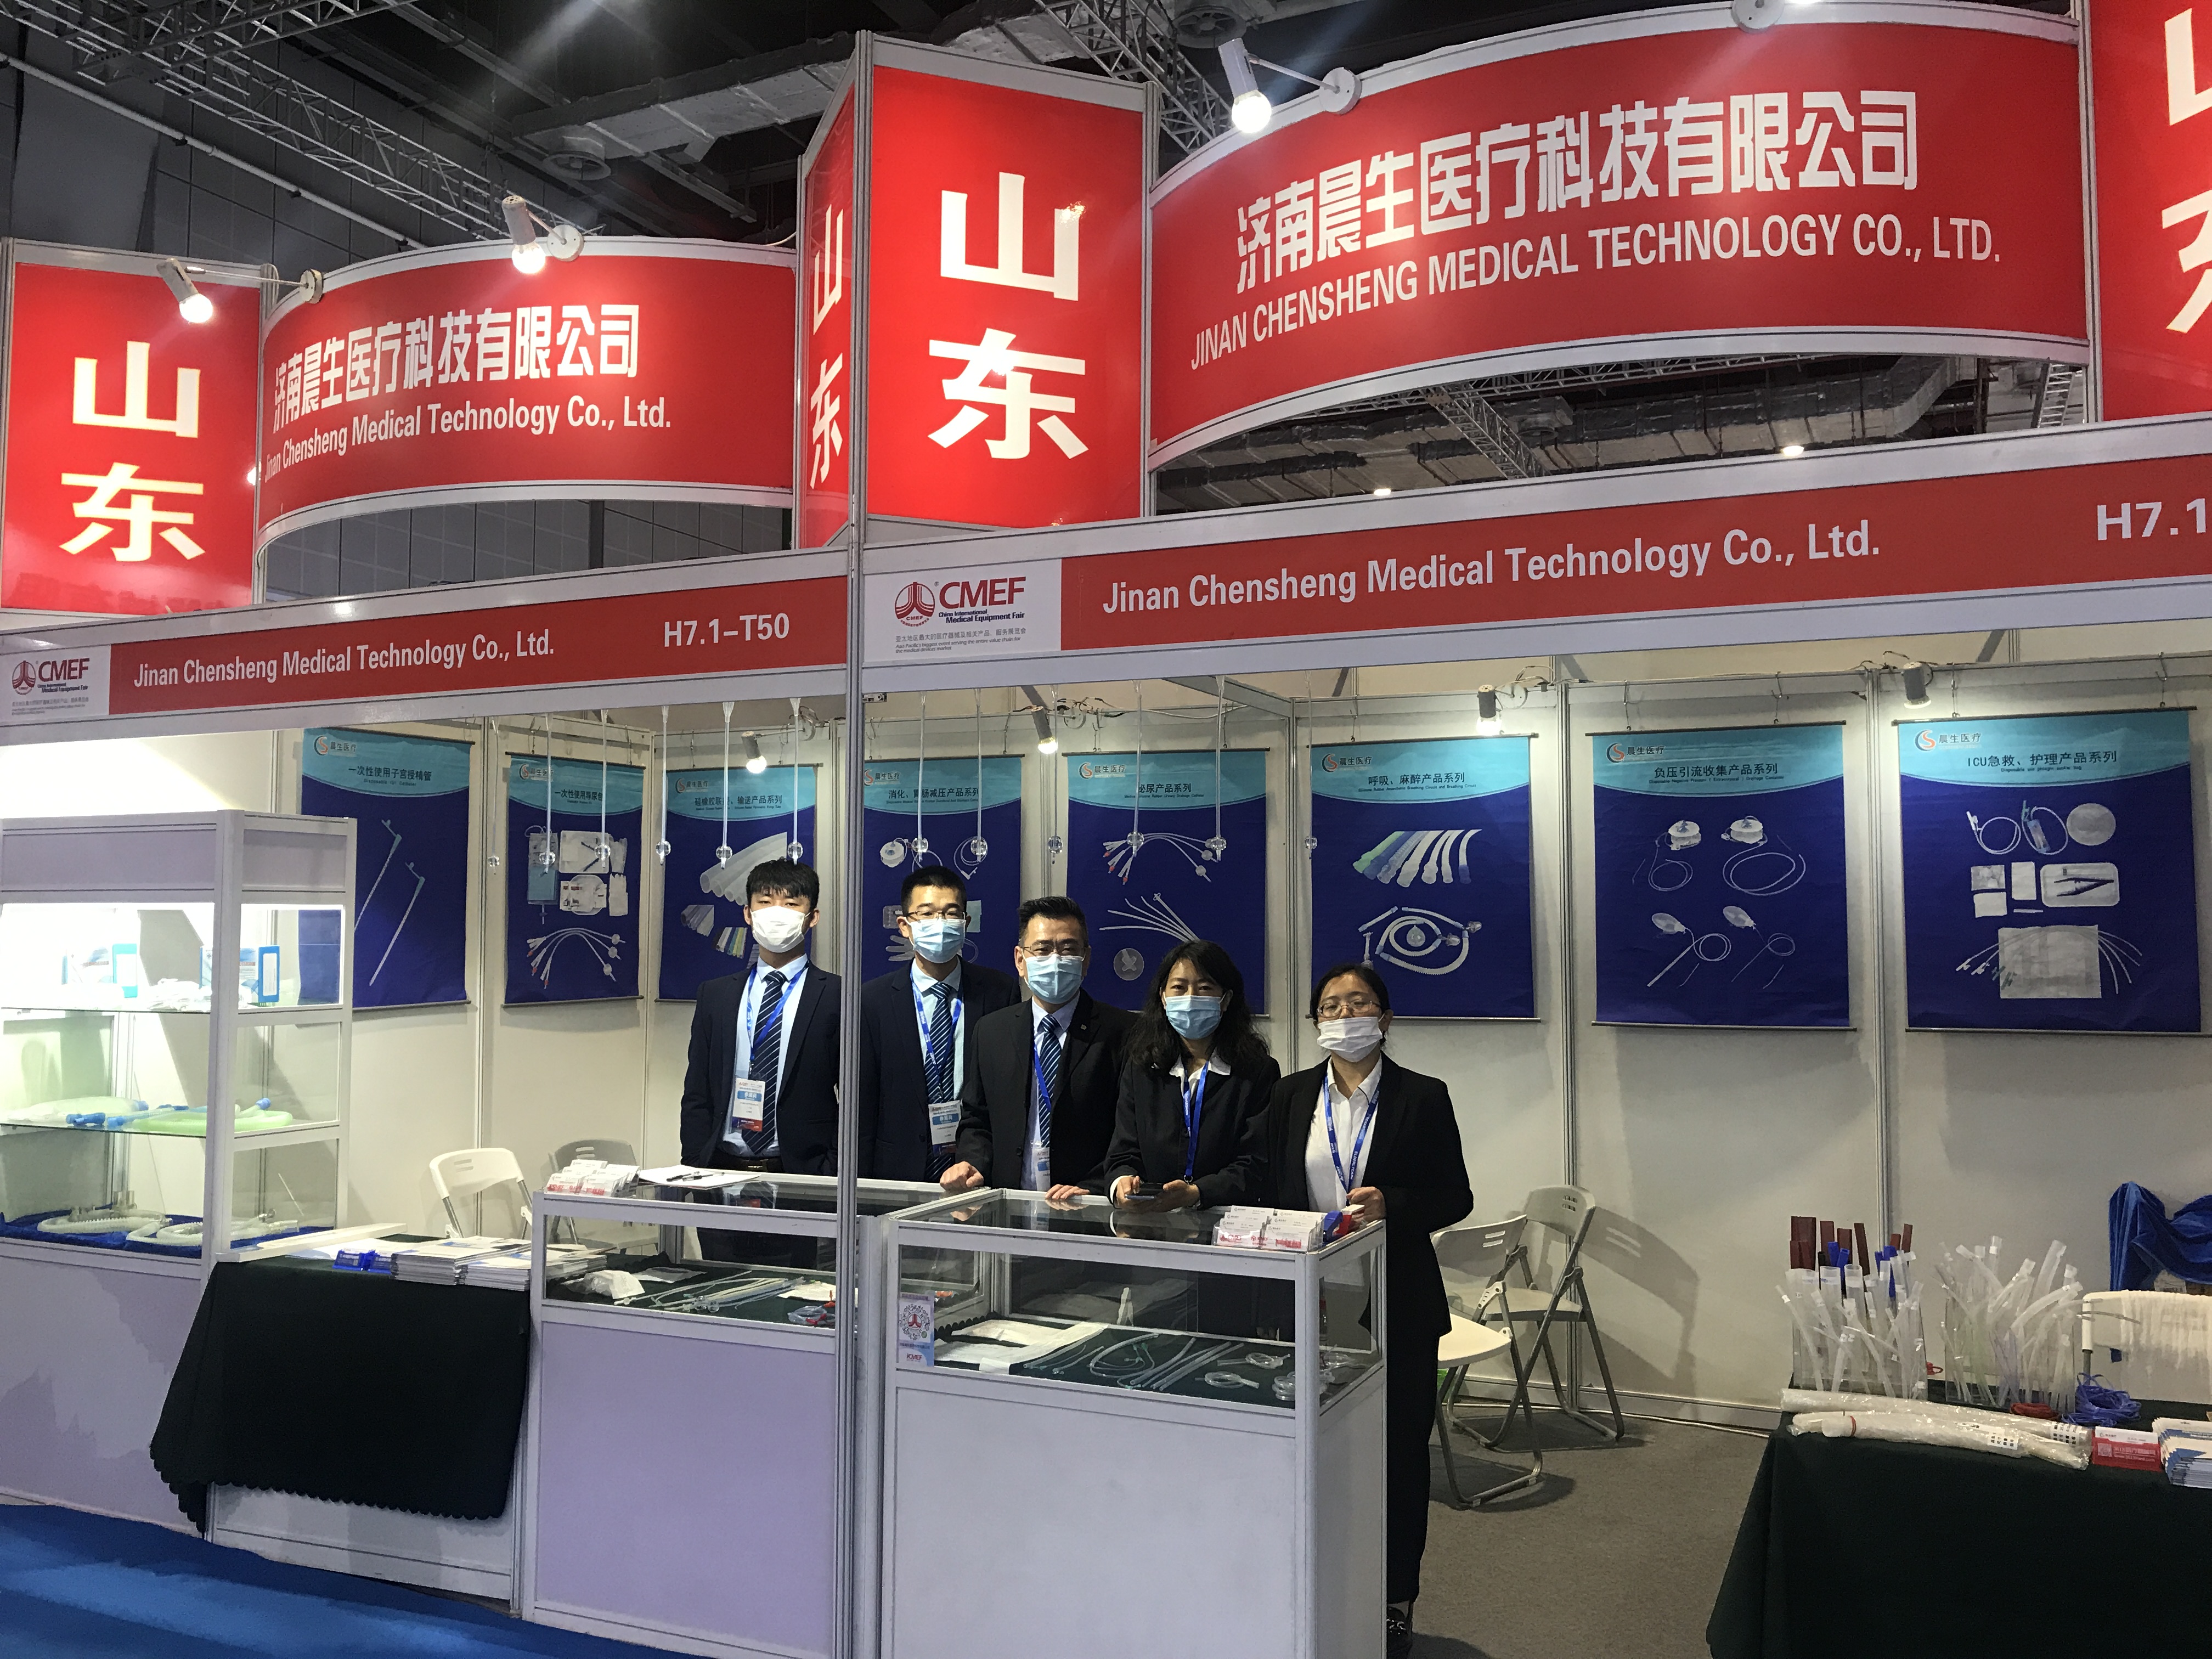 We attend the 83rd. CMEF in Shanghai 